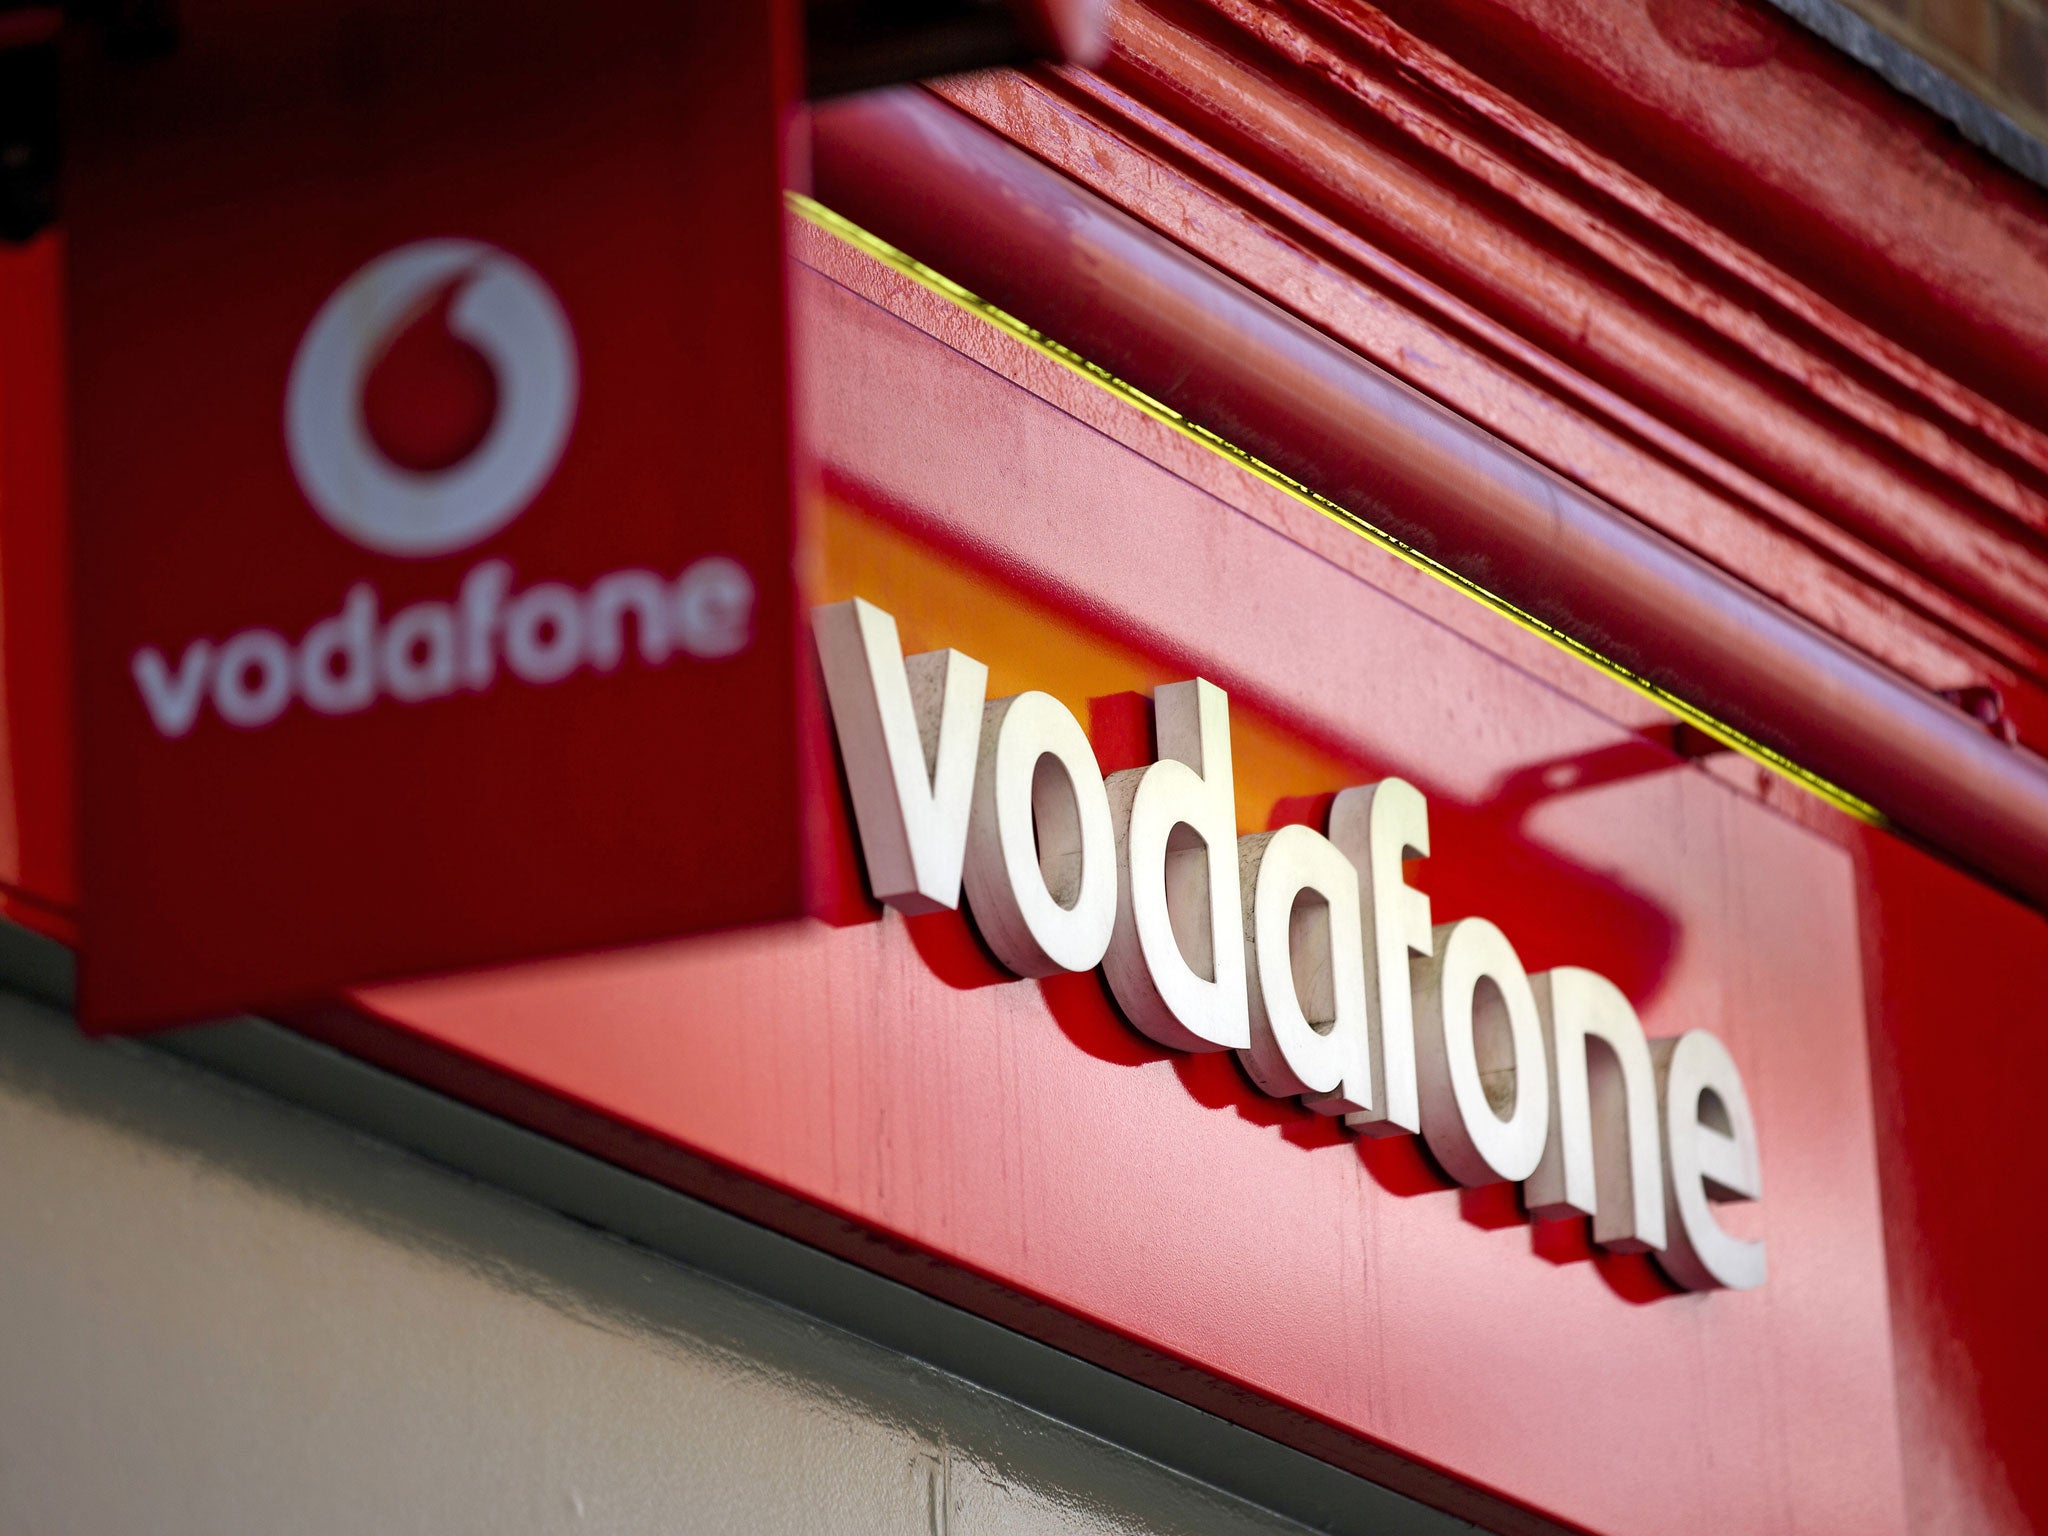 Vodafone reported slightly better-than-expected revenues for its third quarter with the UK returning to growth for the first time in 15 quarters